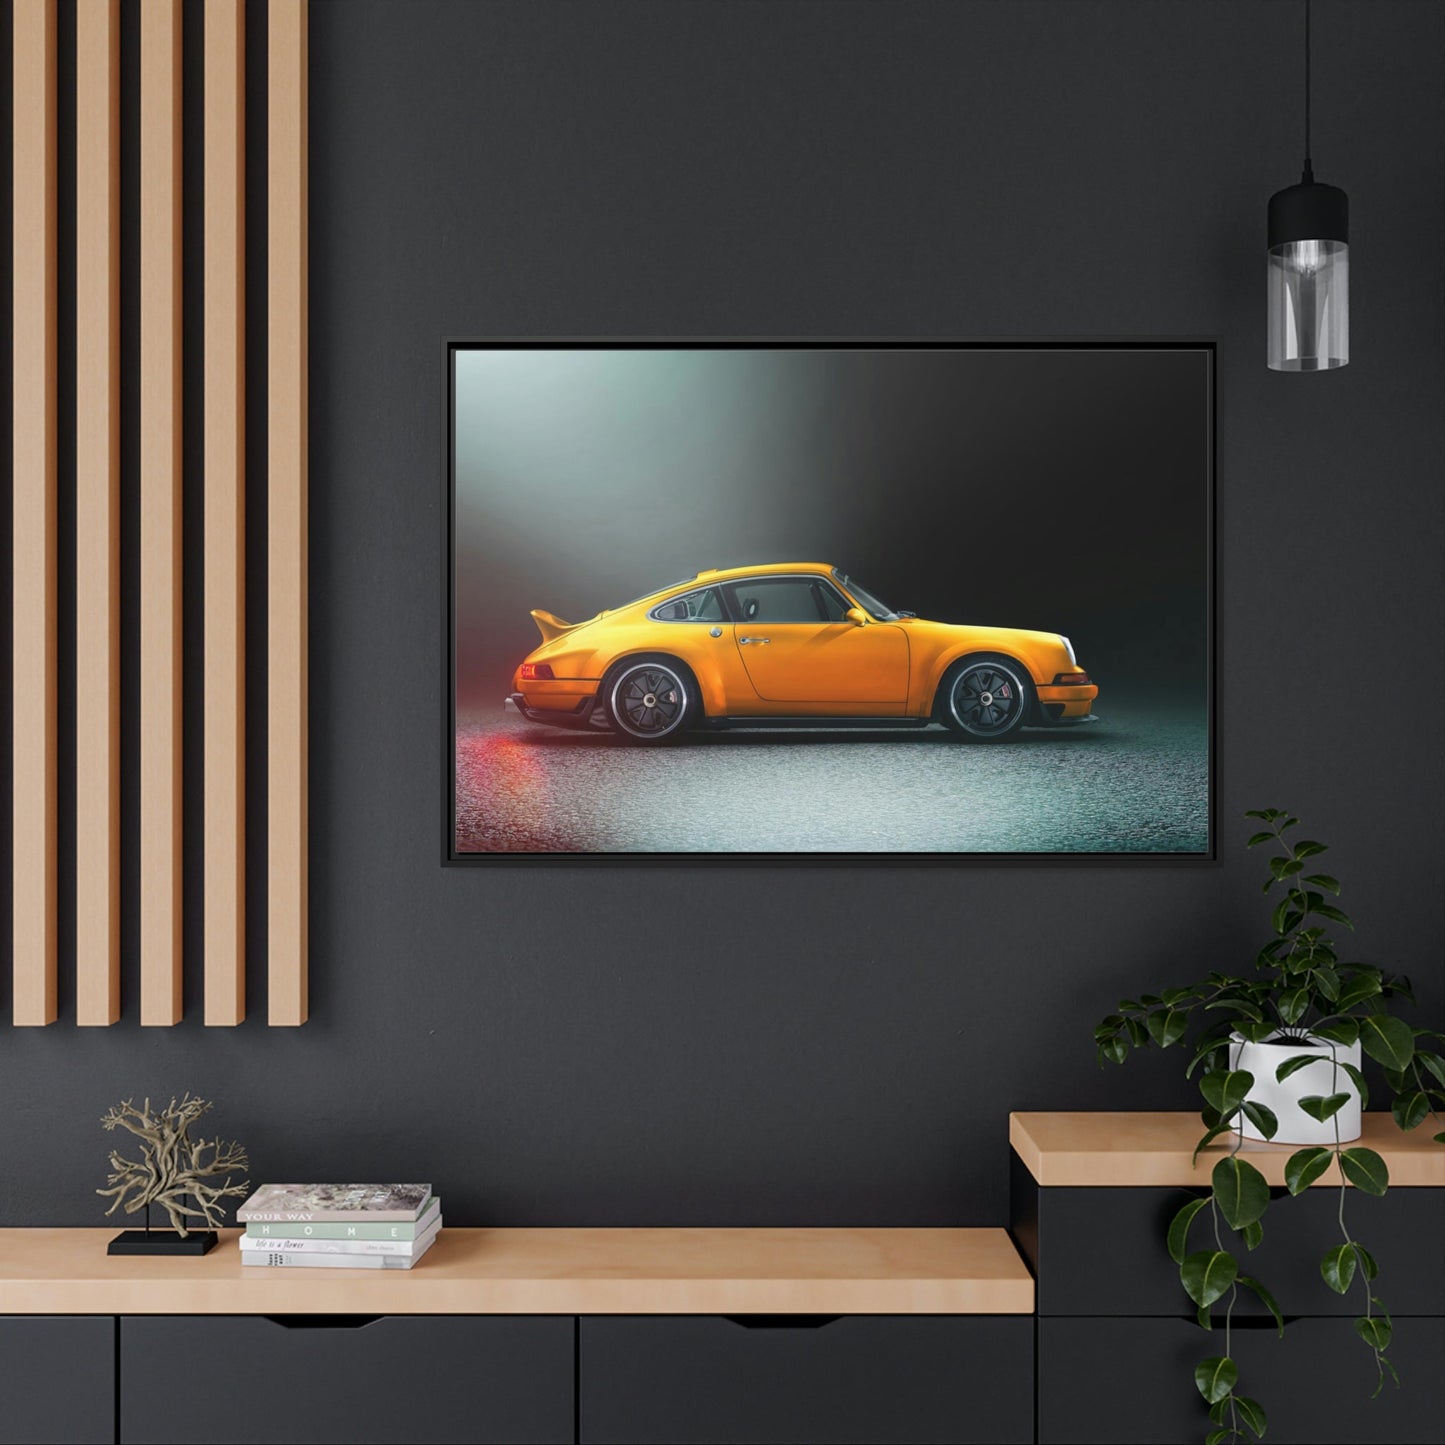 The Porsche Lifestyle: A Framed Poster of the Iconic Sports Car Brand